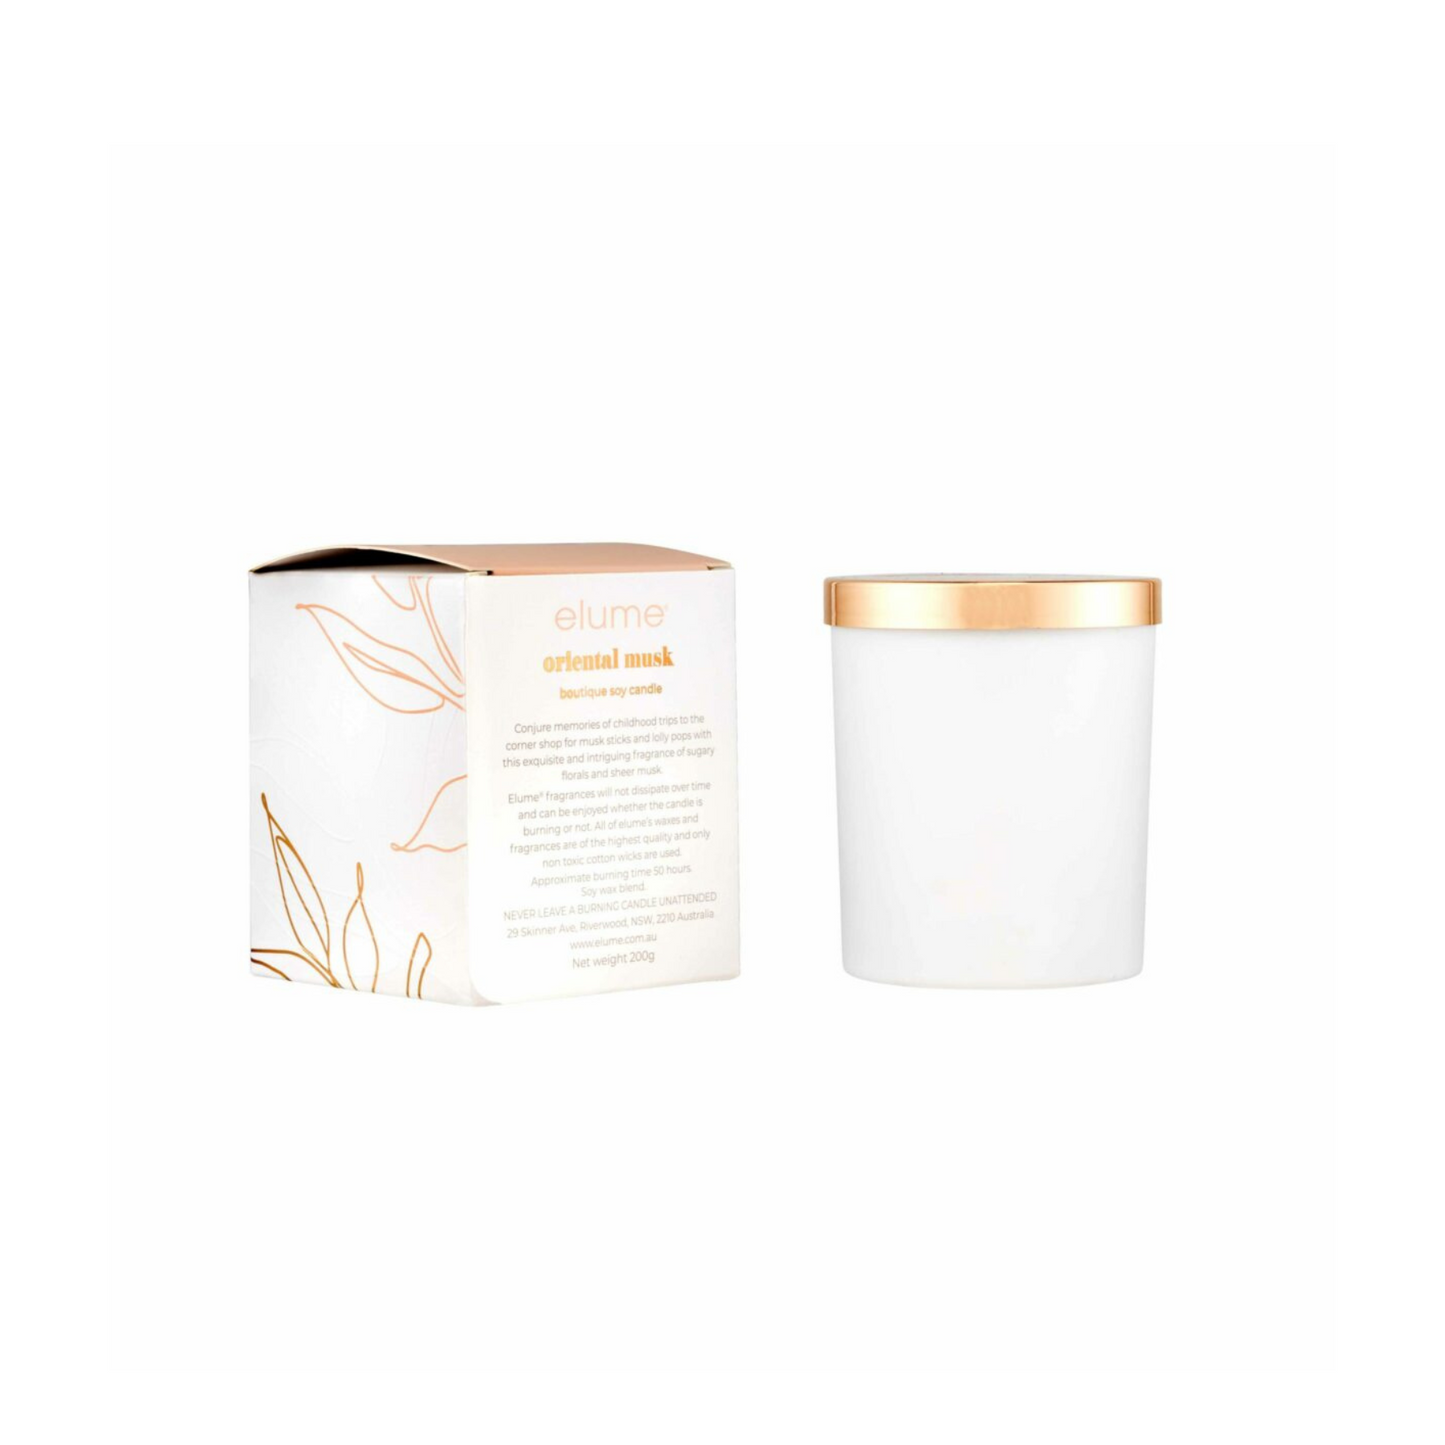 Oriental Musk: Elume Boutique Soy Candle